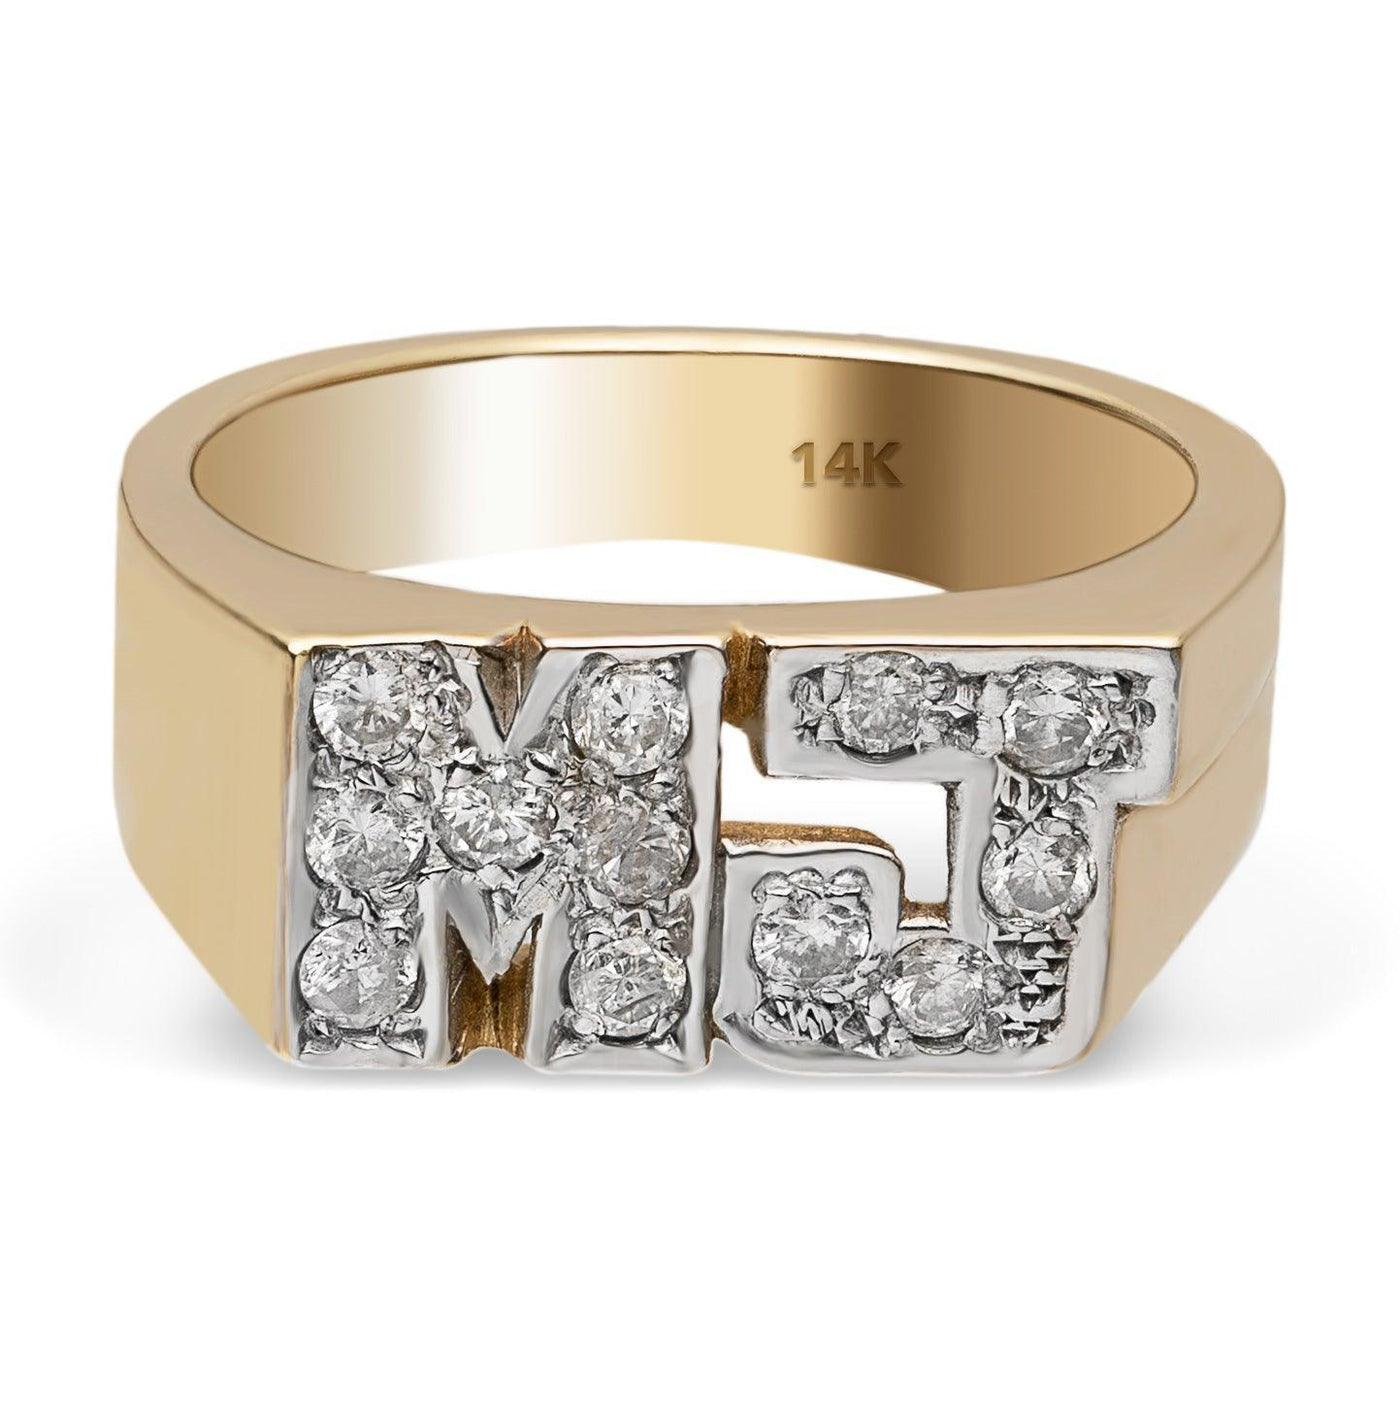 Buy Square Initial Ring Online In India - Etsy India